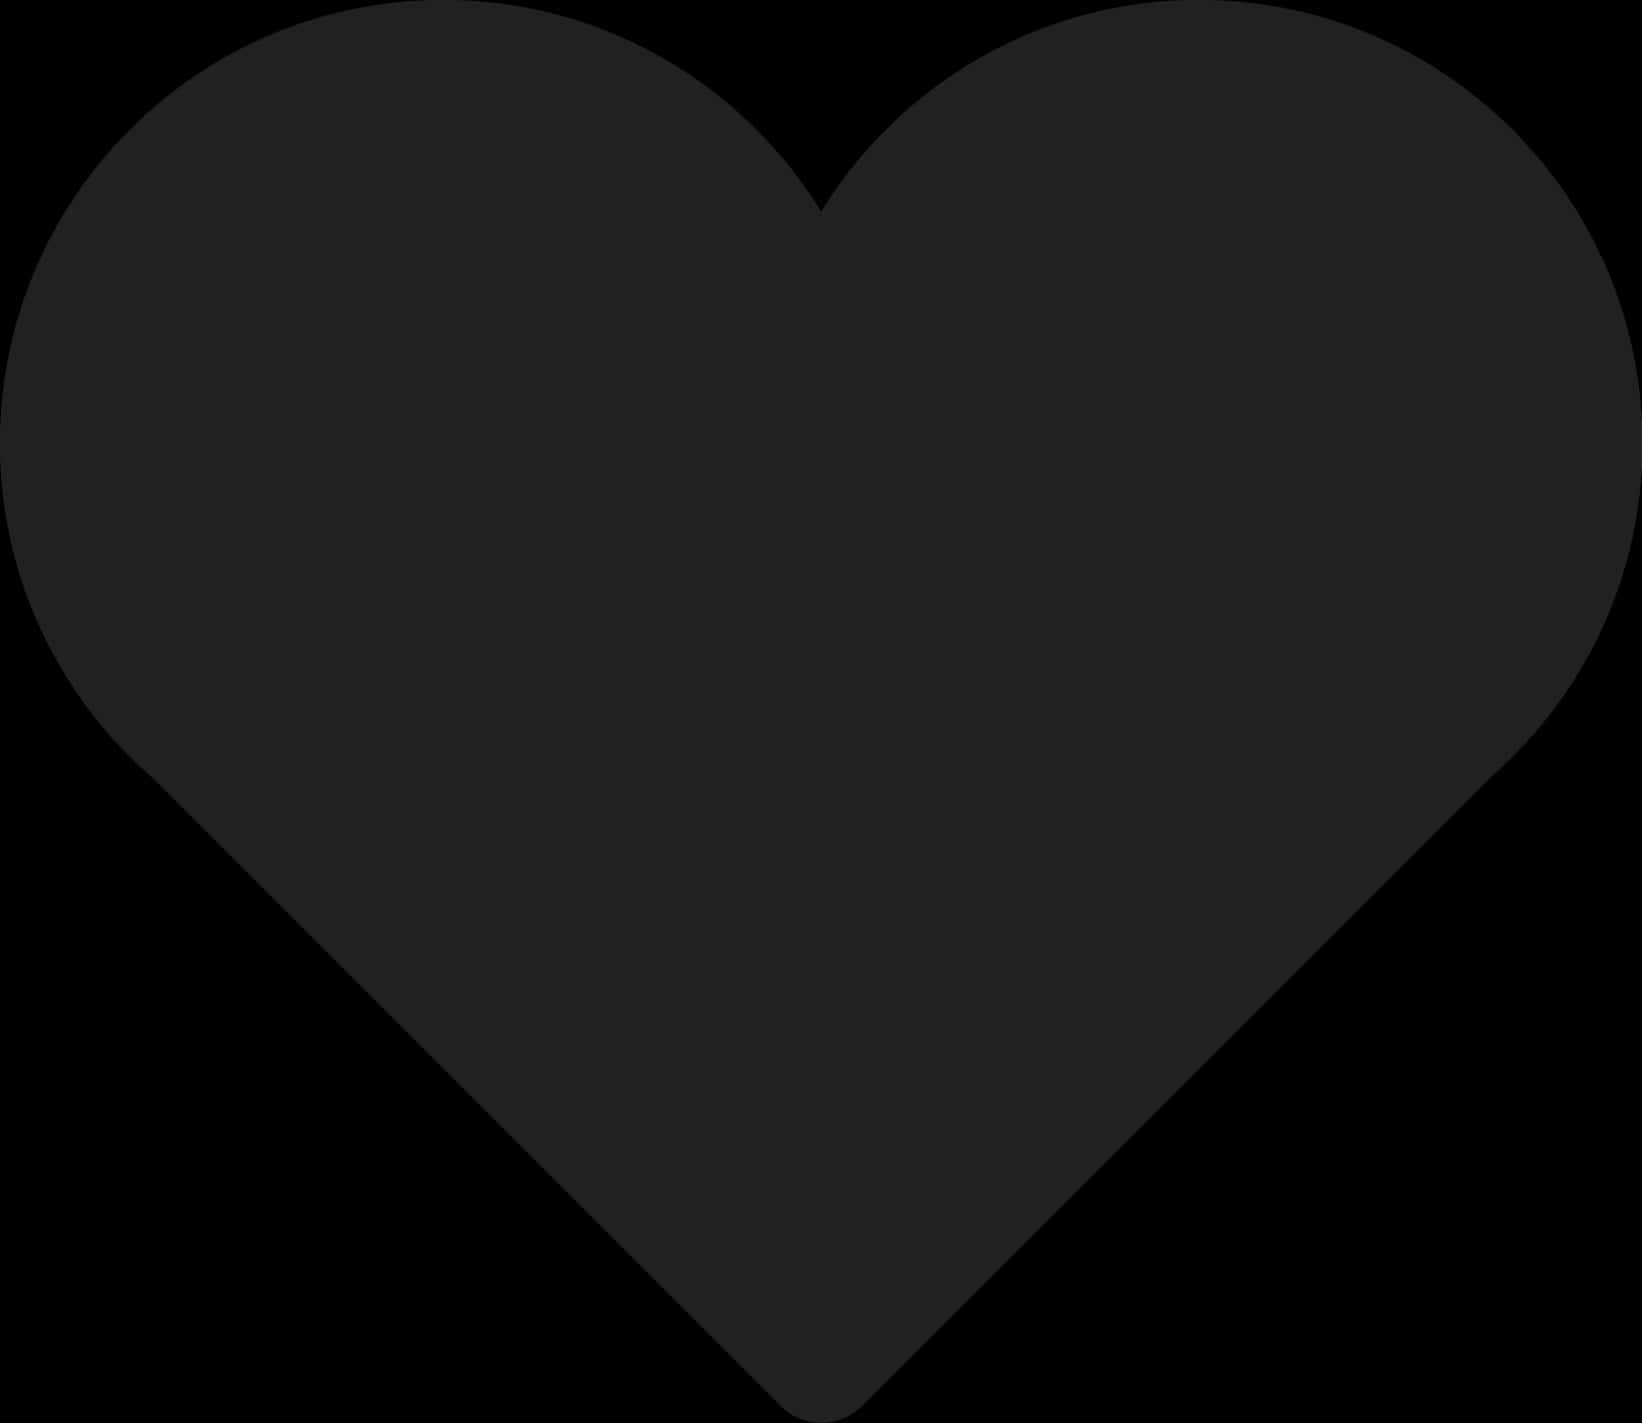 Black Heart Icon Silhouette PNG